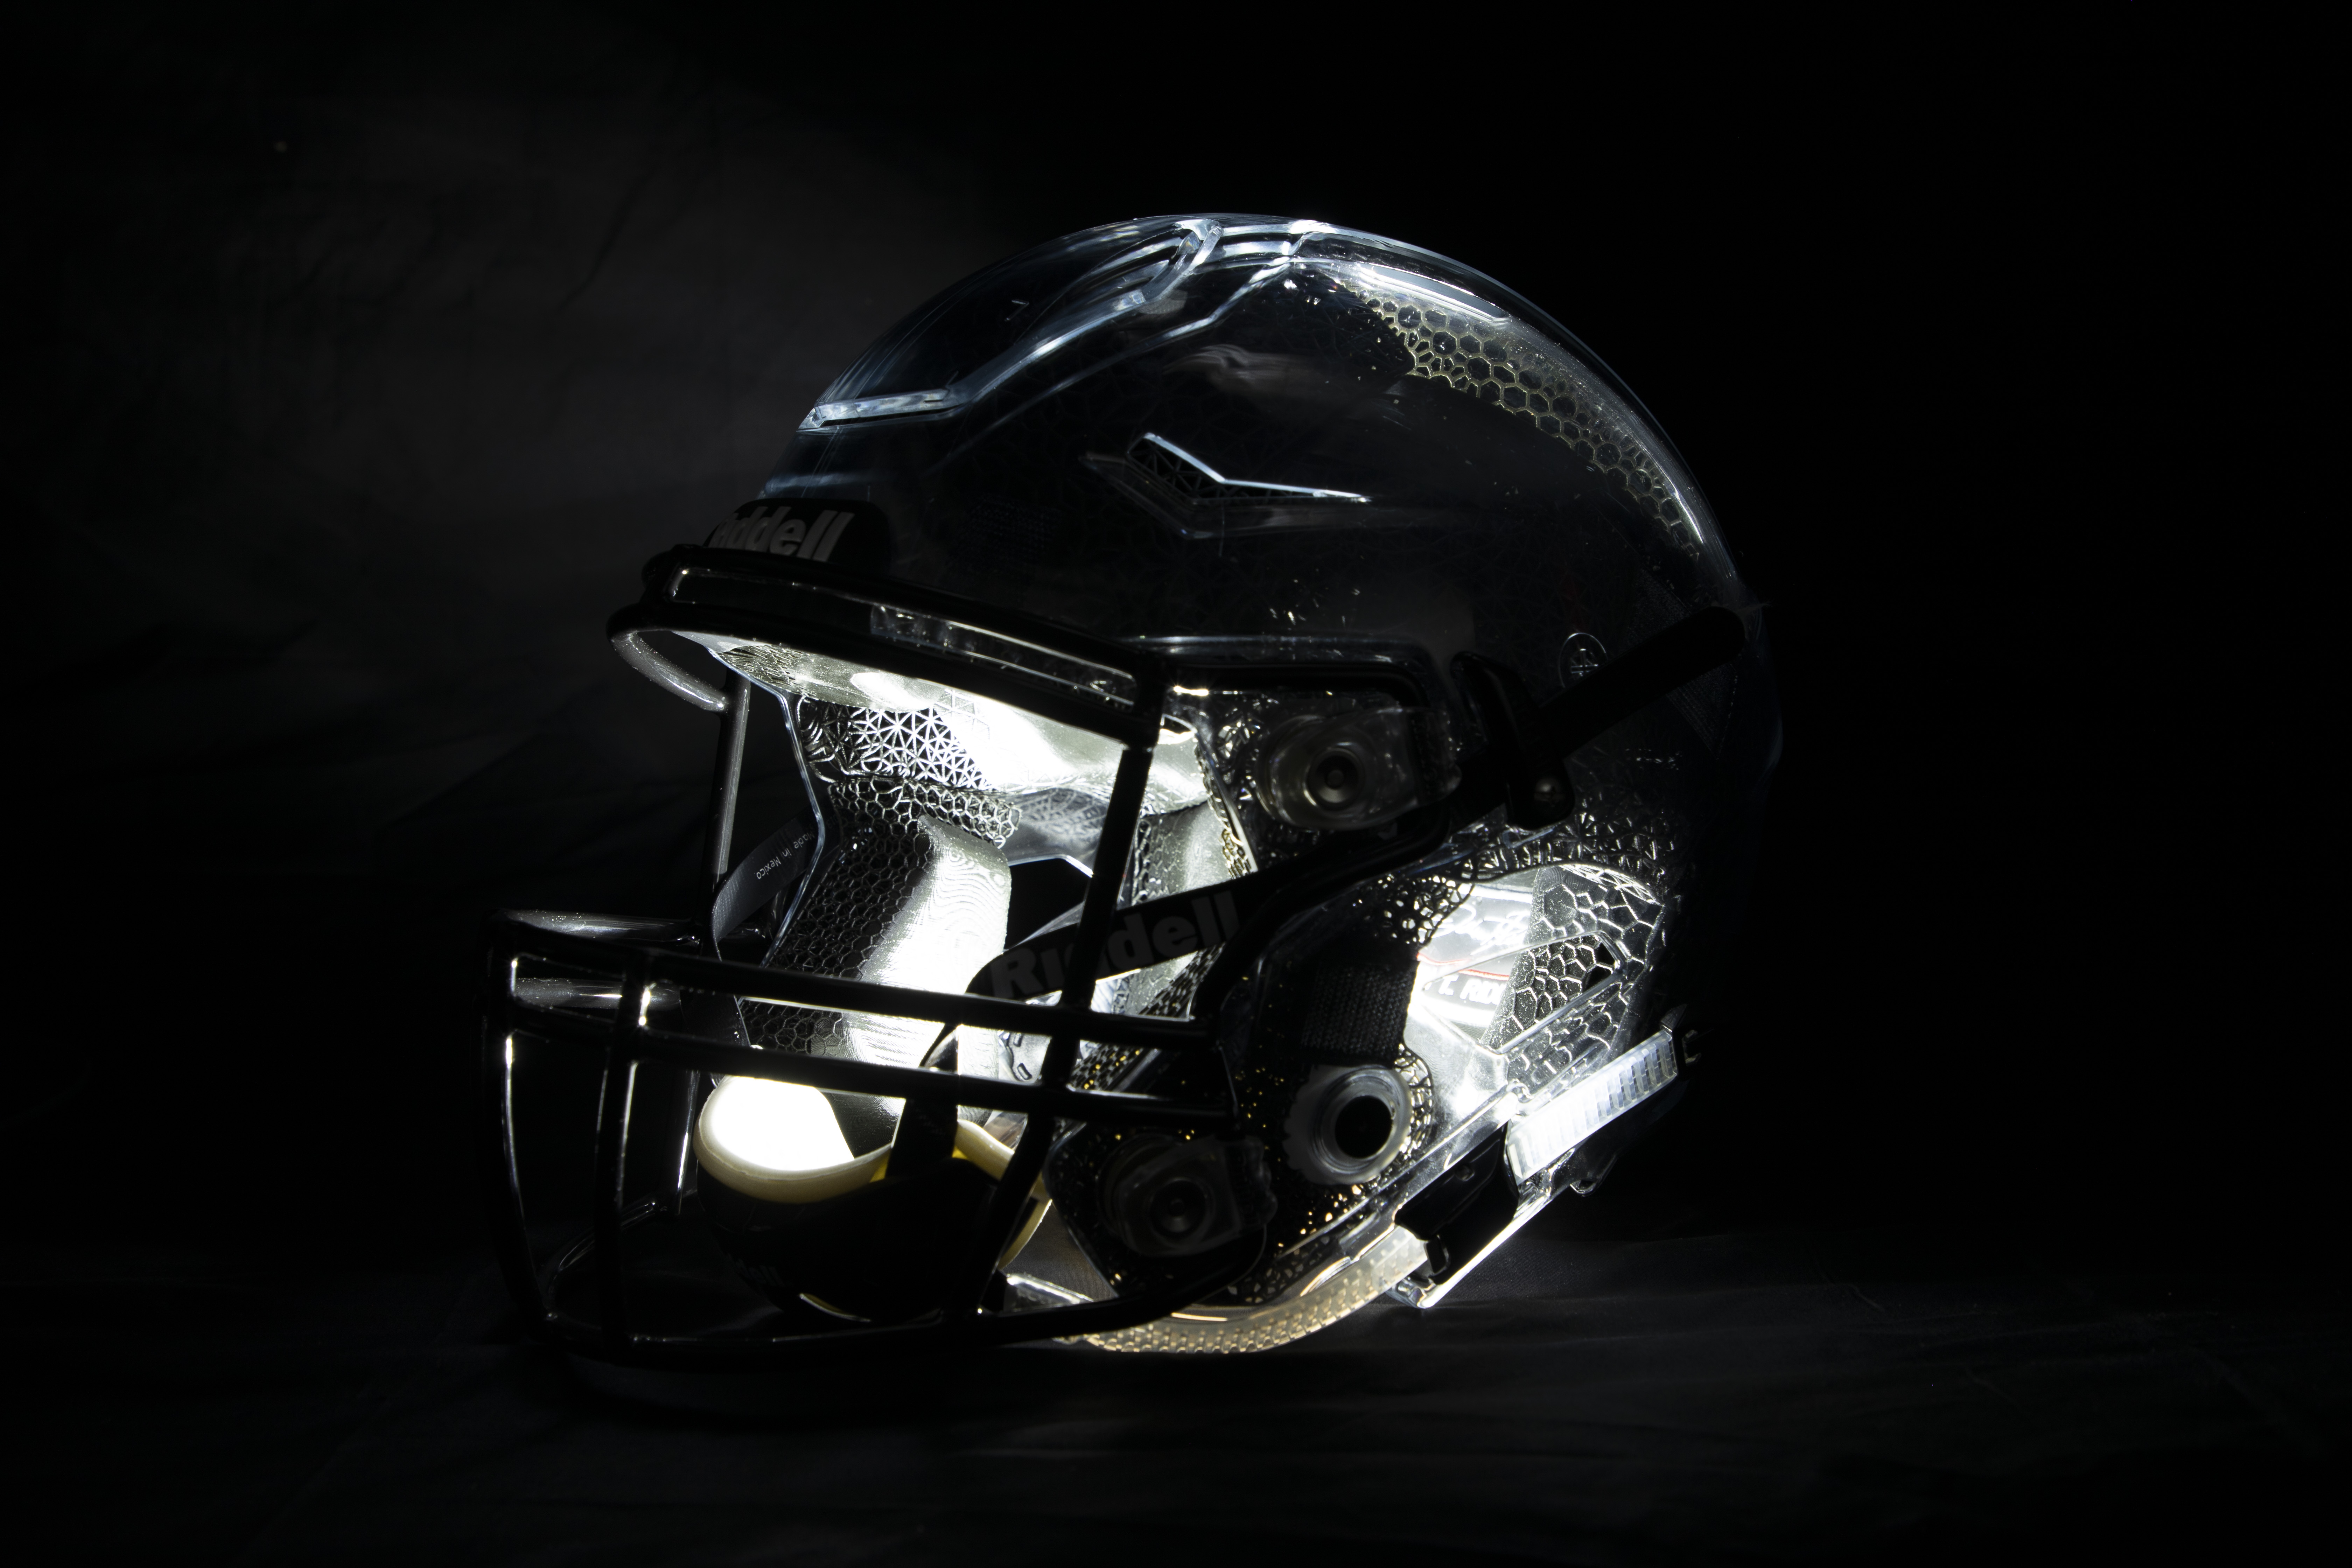 The Riddell SpeedFlex Precision Diamond helmet lining with back-lit Precision-Fit lining. Image via Carbon